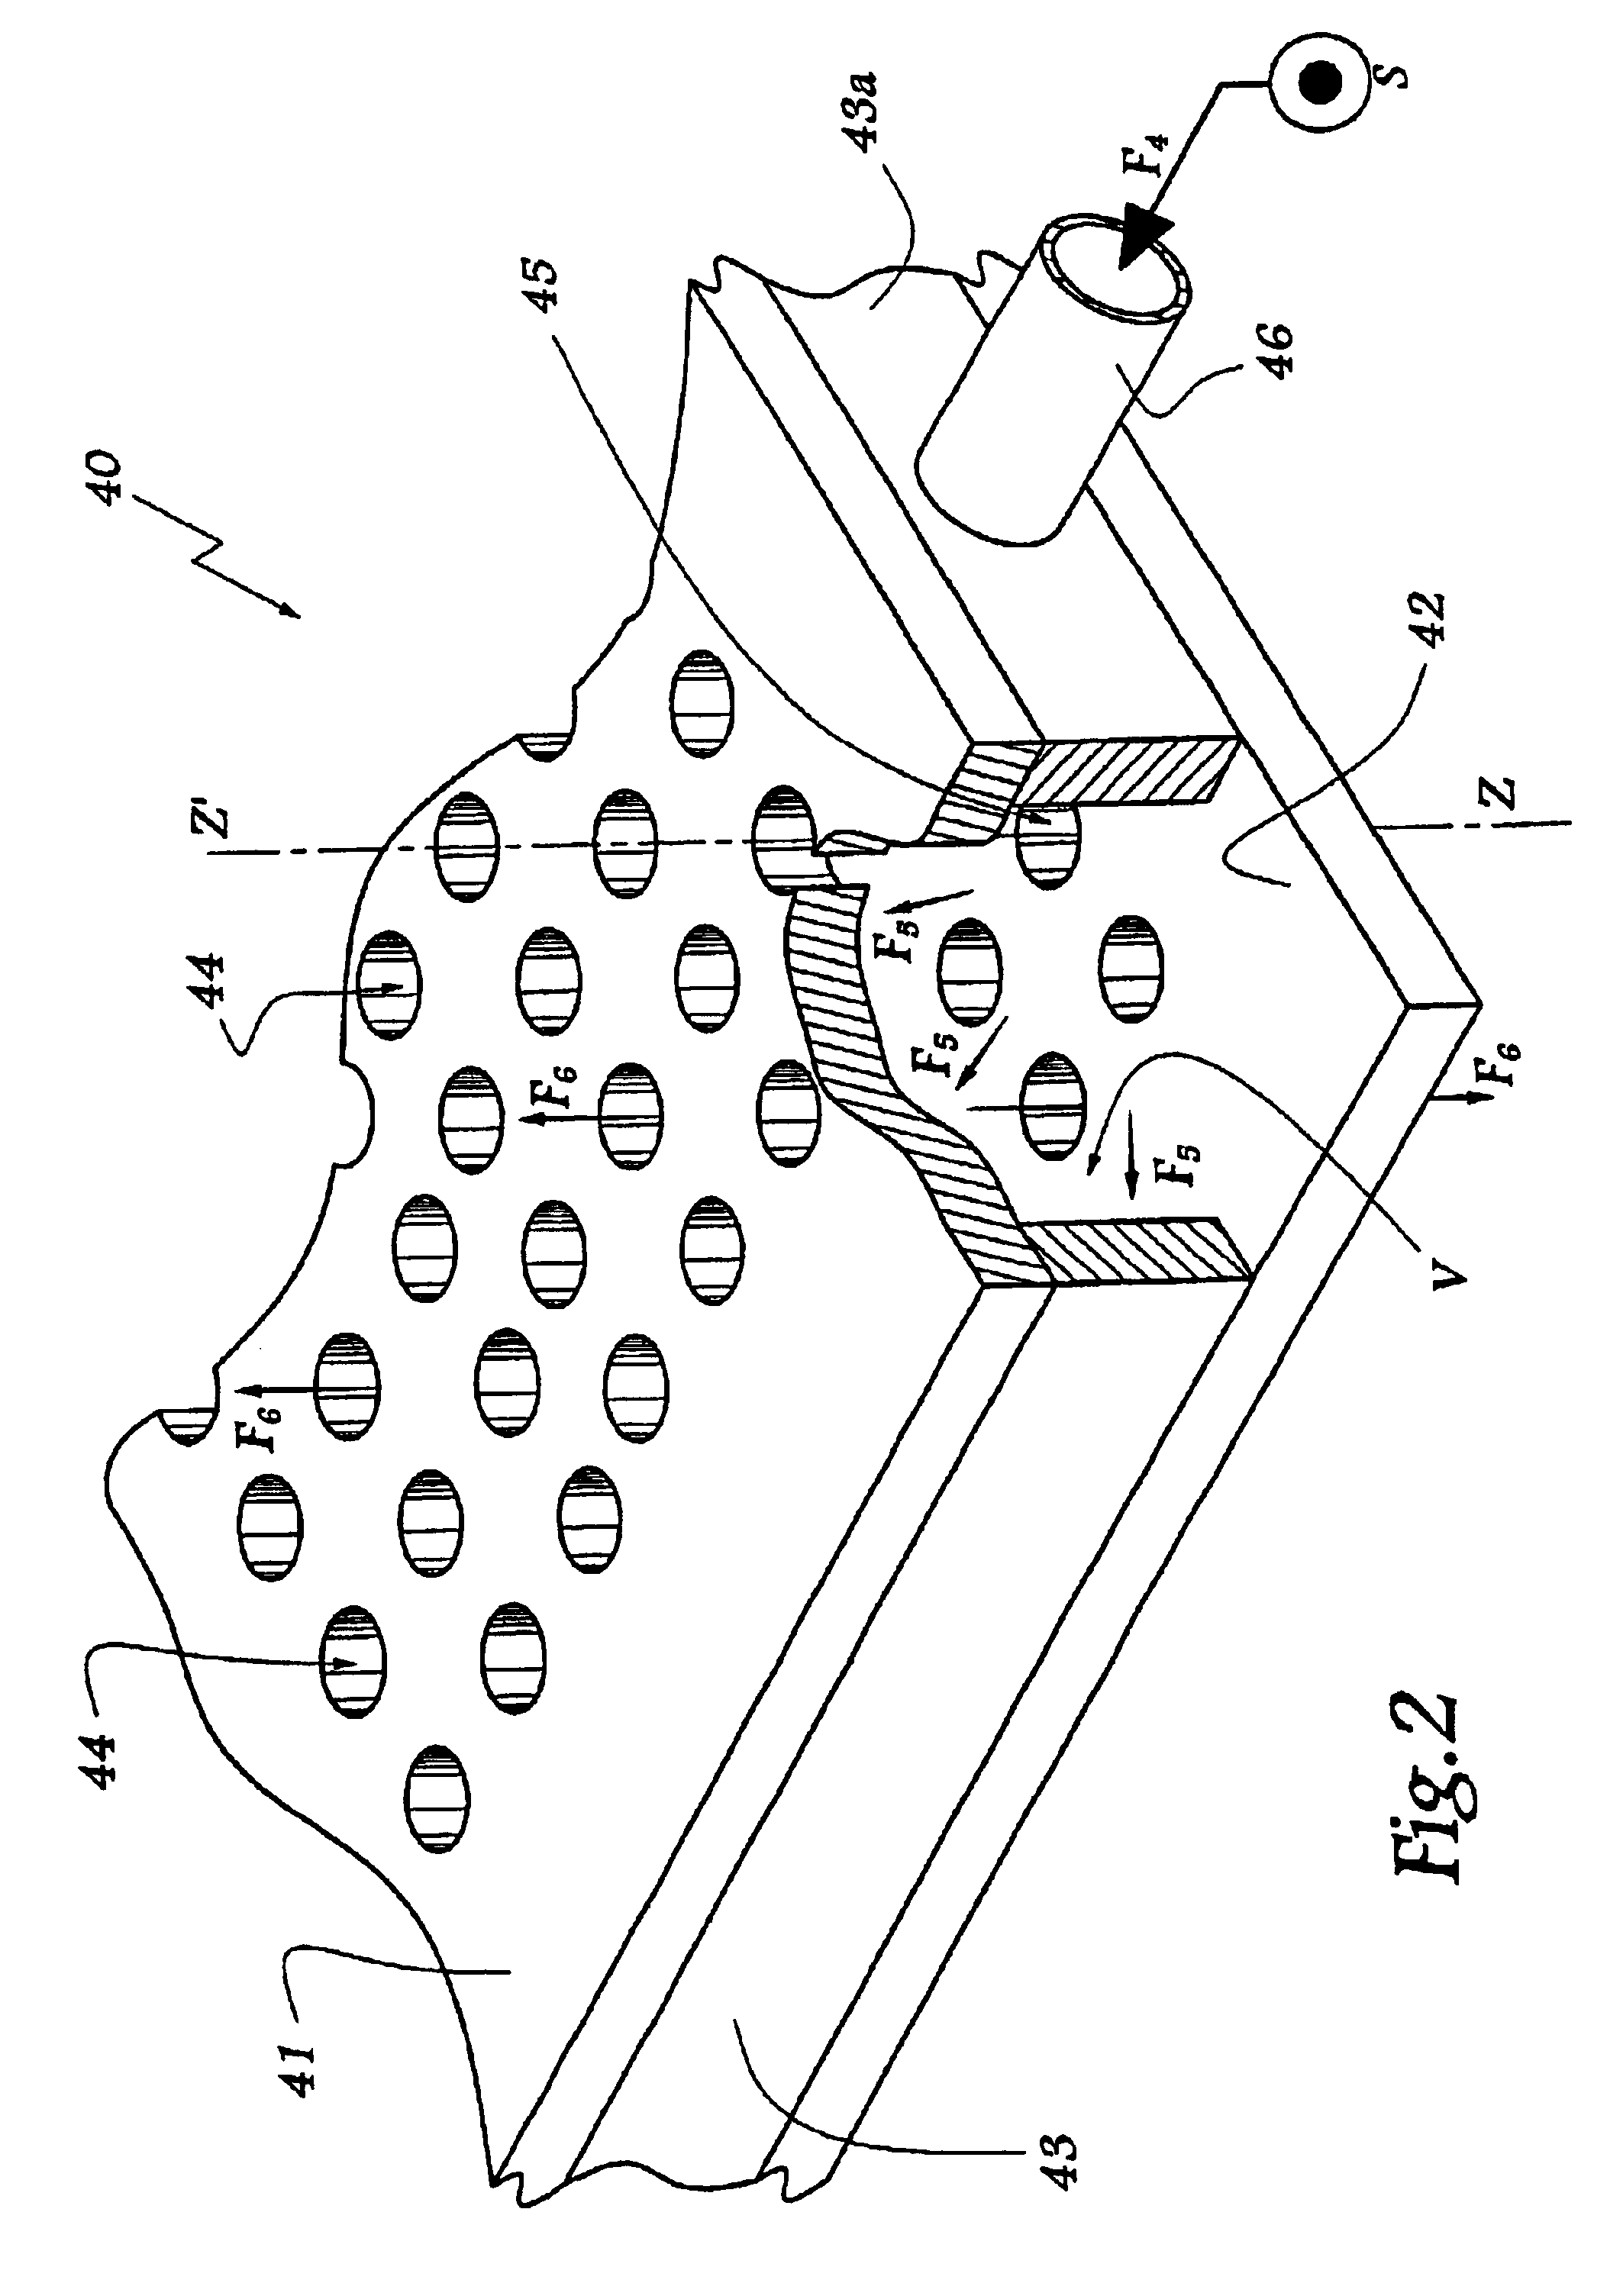 Method and apparatus for guiding the harness cords of a Jacquard loom